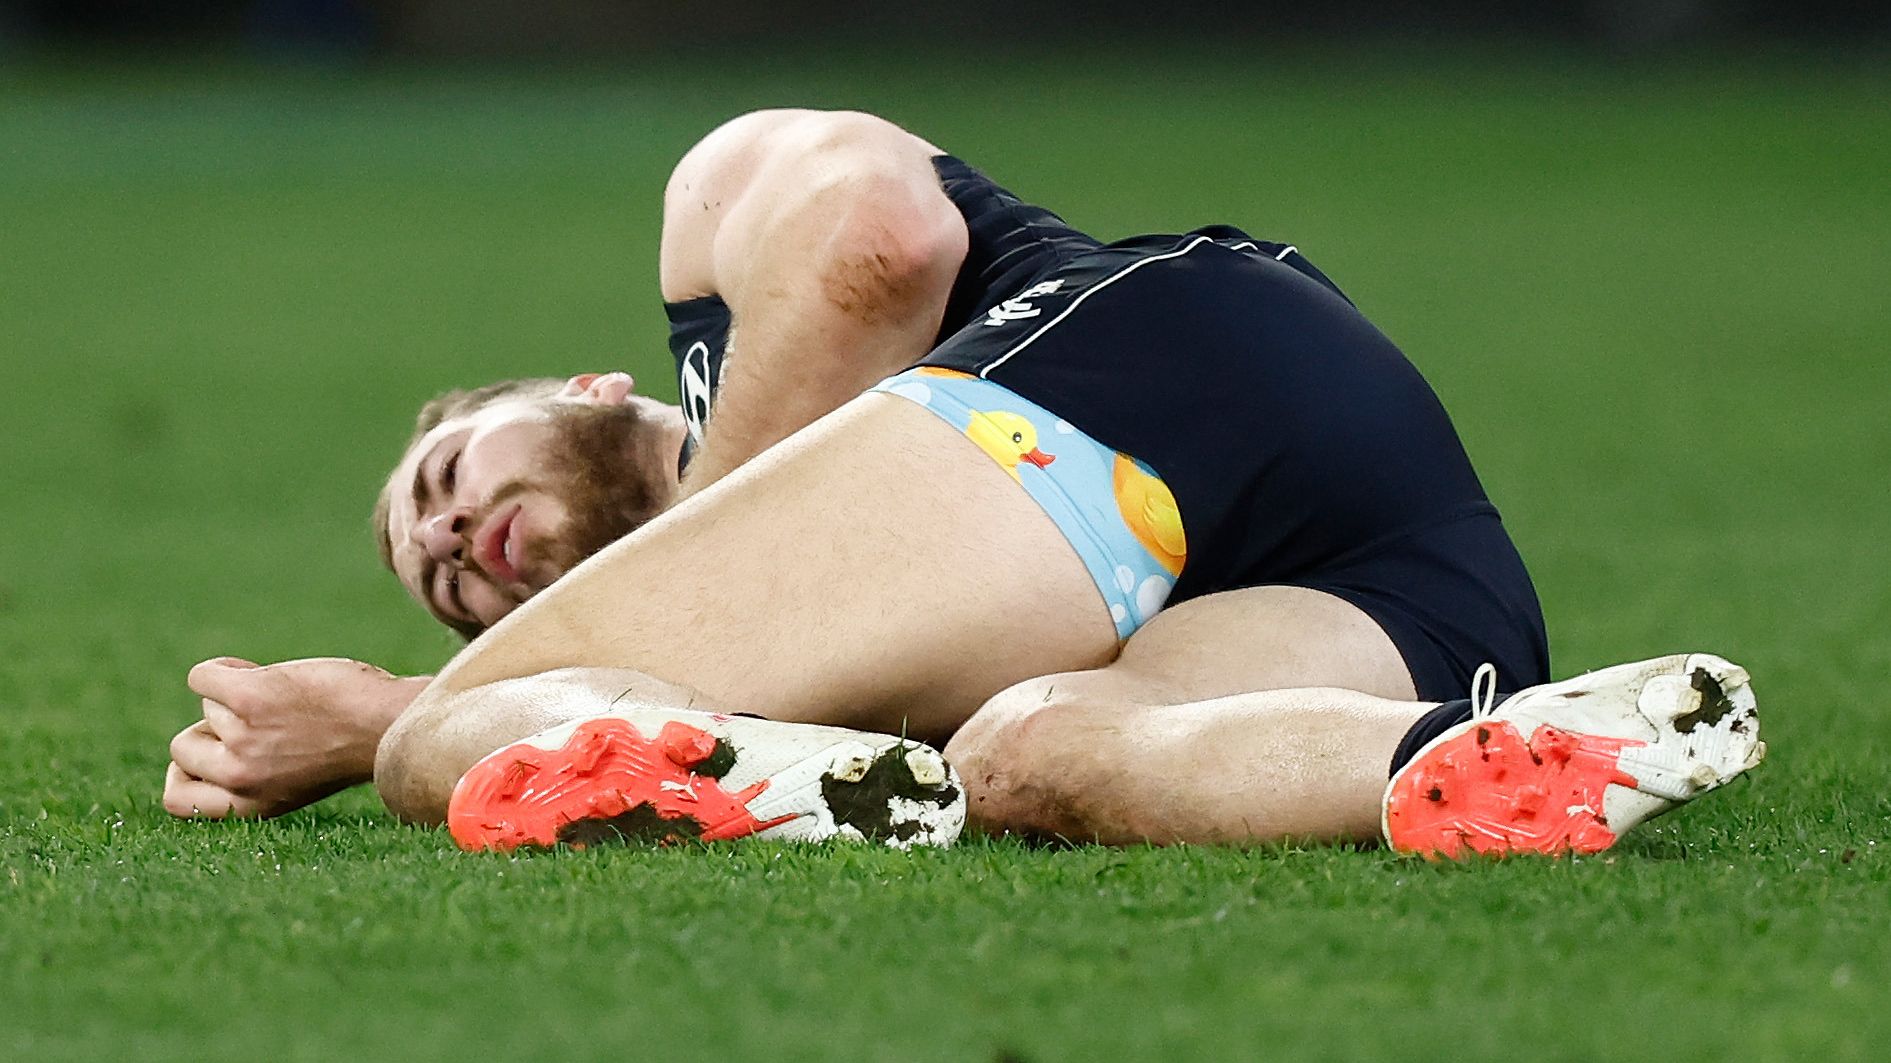 MELBOURNE, AUSTRALIA - SEPTEMBER 08: Harry McKay of the Blues is seen injured during the 2023 AFL First Elimination Final match between the Carlton Blues and the Sydney Swans at Melbourne Cricket Ground on September 08, 2023 in Melbourne, Australia. (Photo by Michael Willson/AFL Photos via Getty Images)